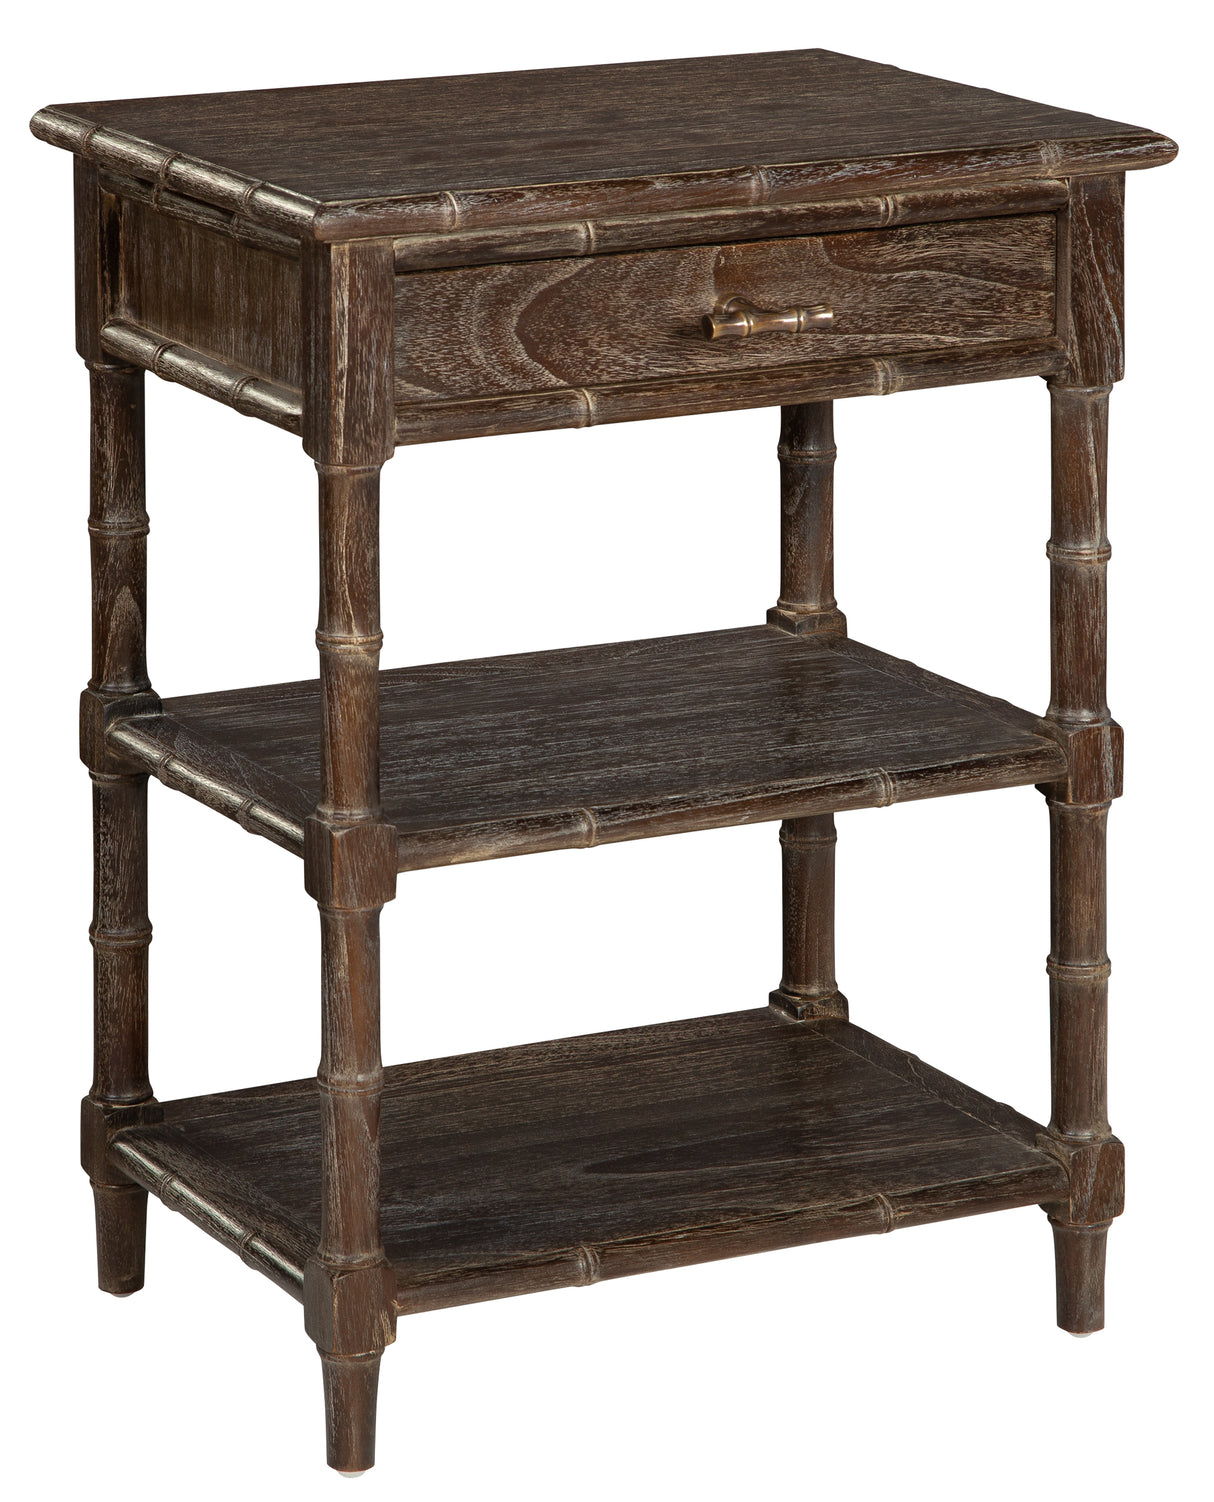 Hekman 28195 Accents 19.5in. x 13.75in. x 27in. End Table